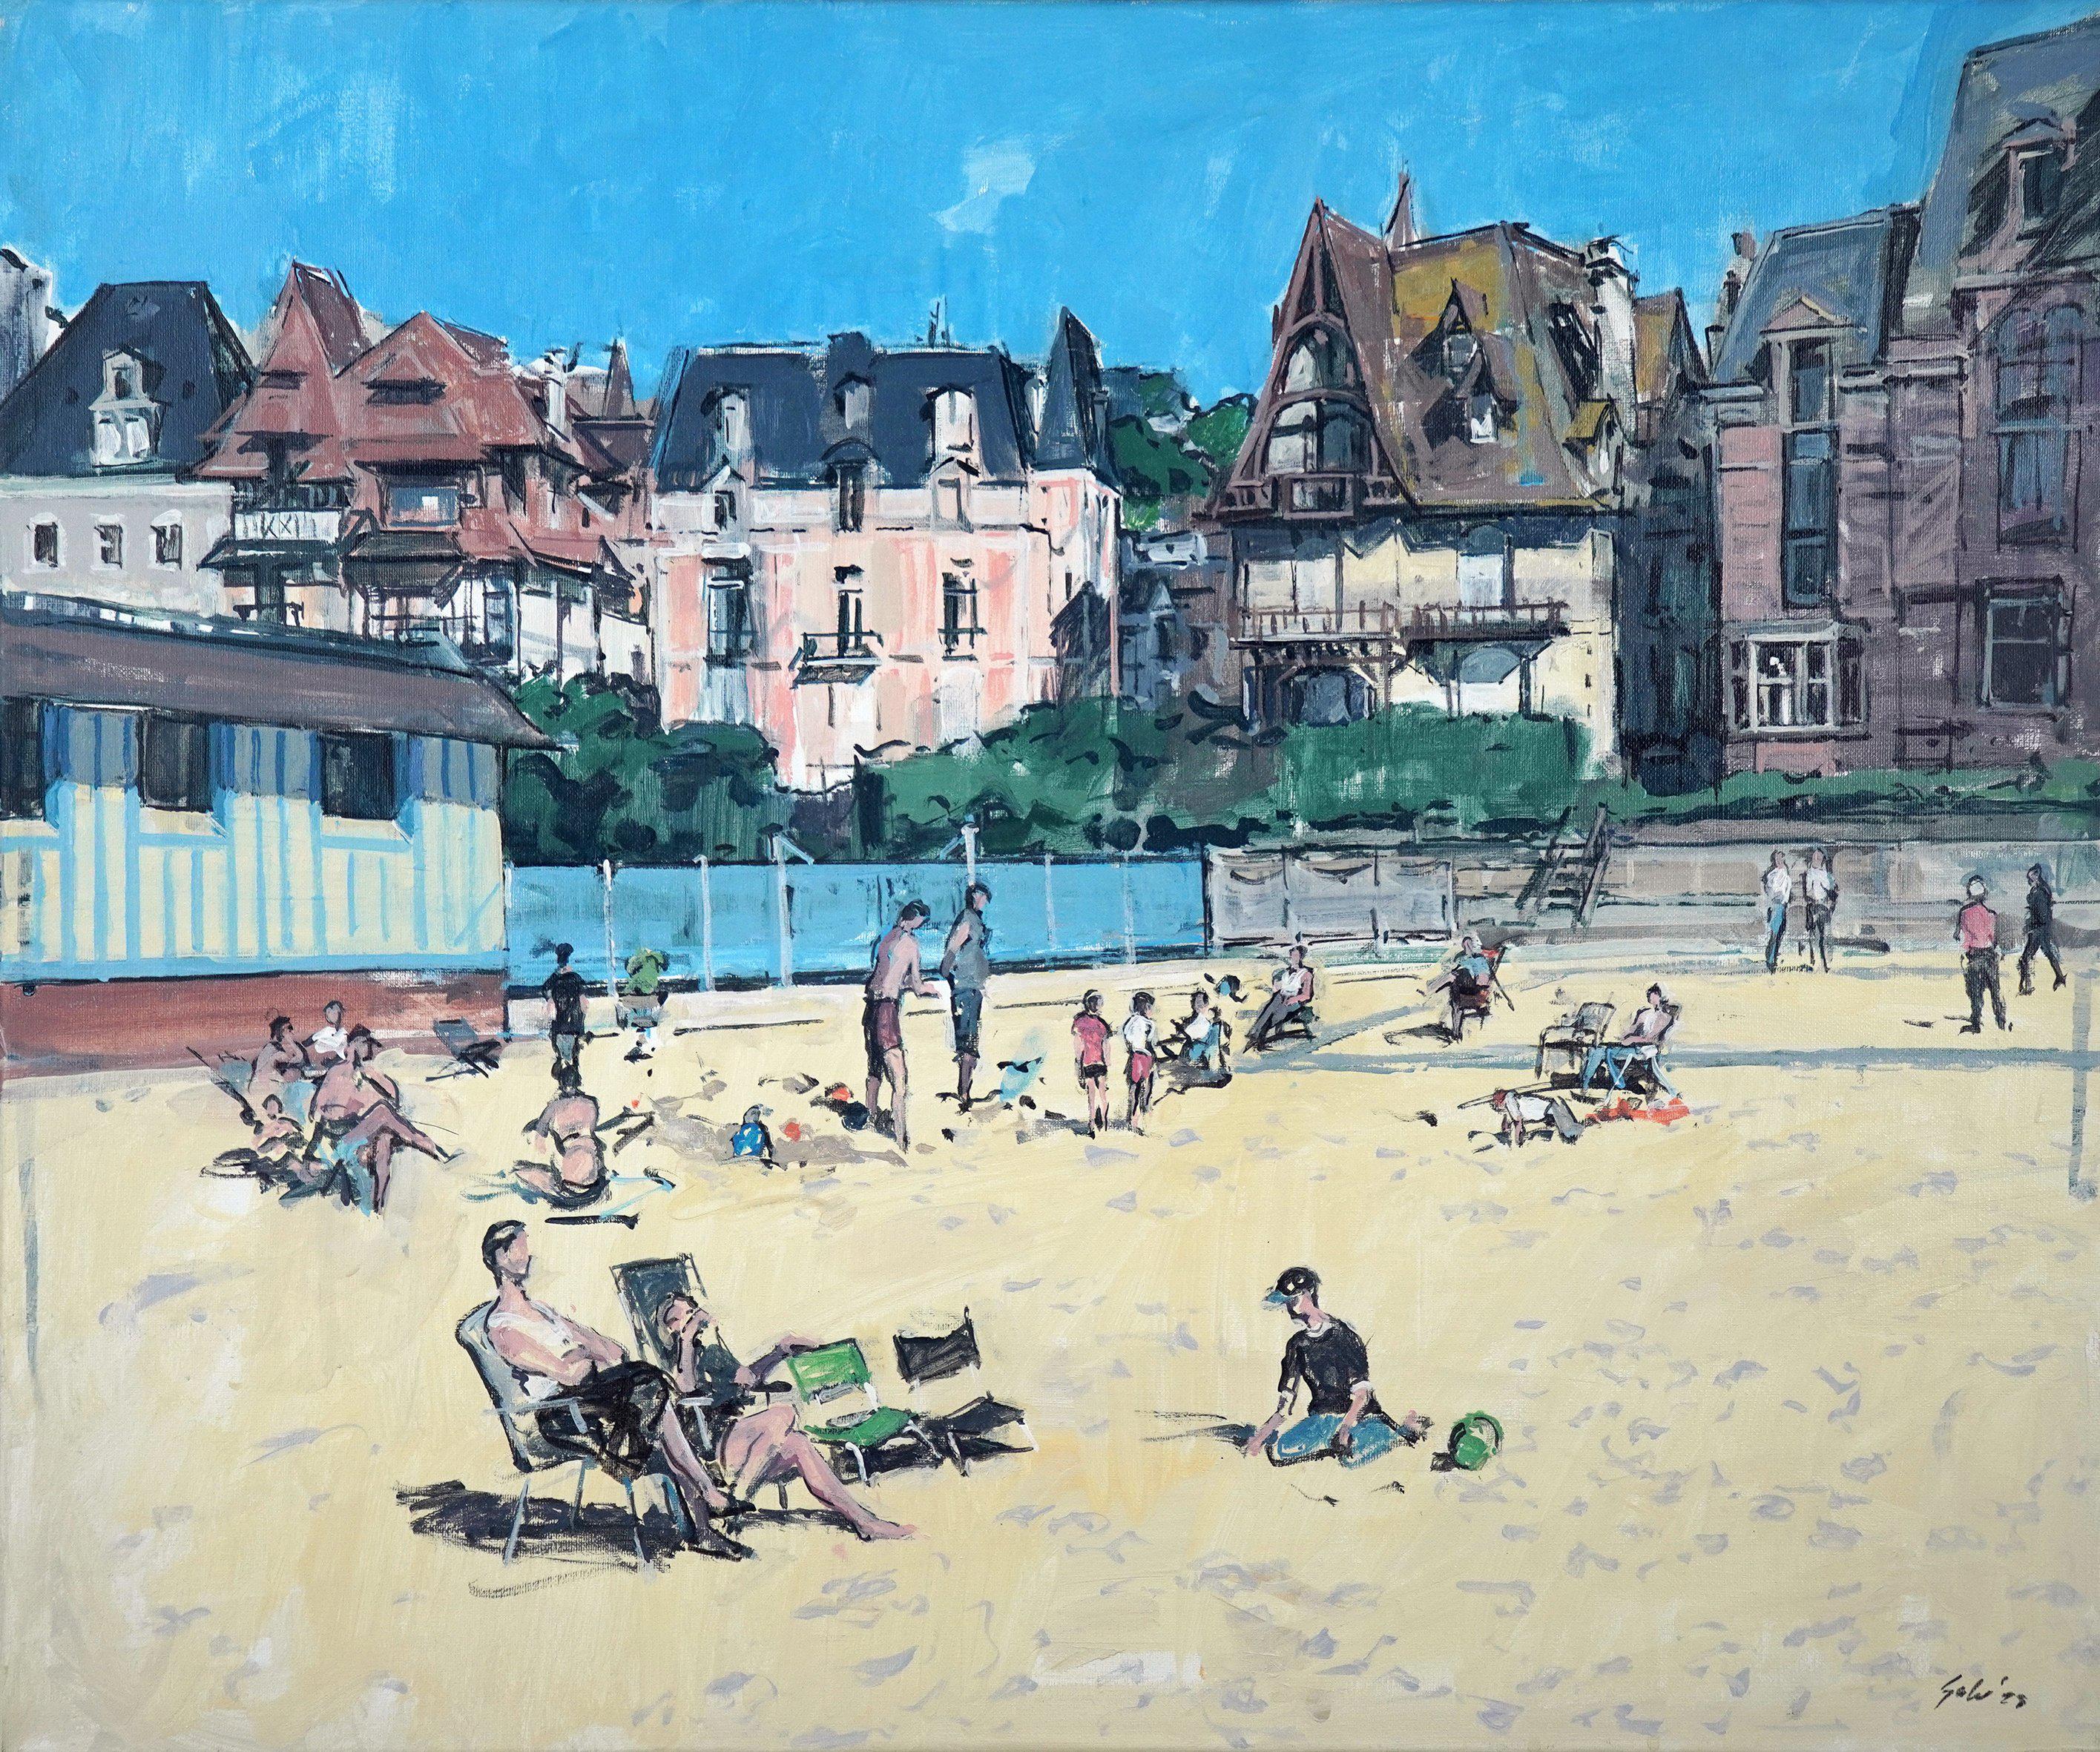 Sunny beach scene with beach houses in Trouville-sur-mer (France) - Painting by Sander van Walsum